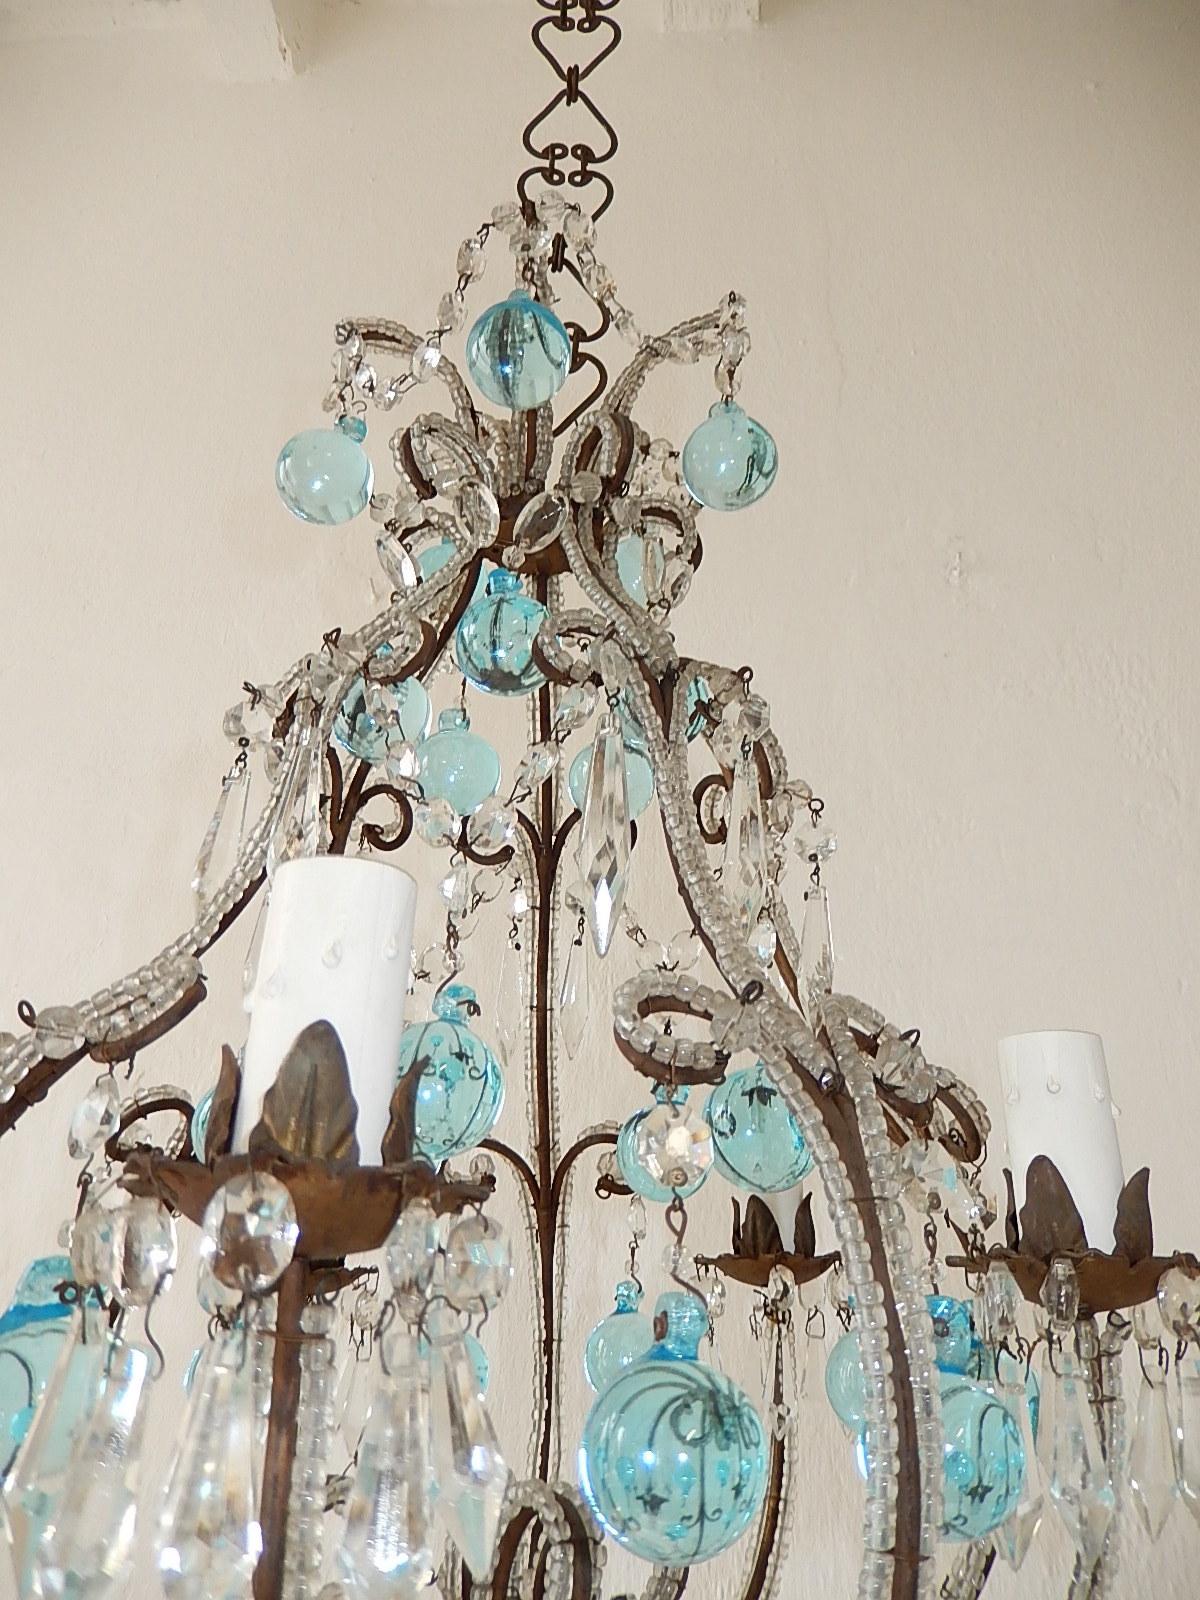 Early 20th Century French Aqua Blue Murano Balls Beaded Swags Chandelier, circa 1900 For Sale